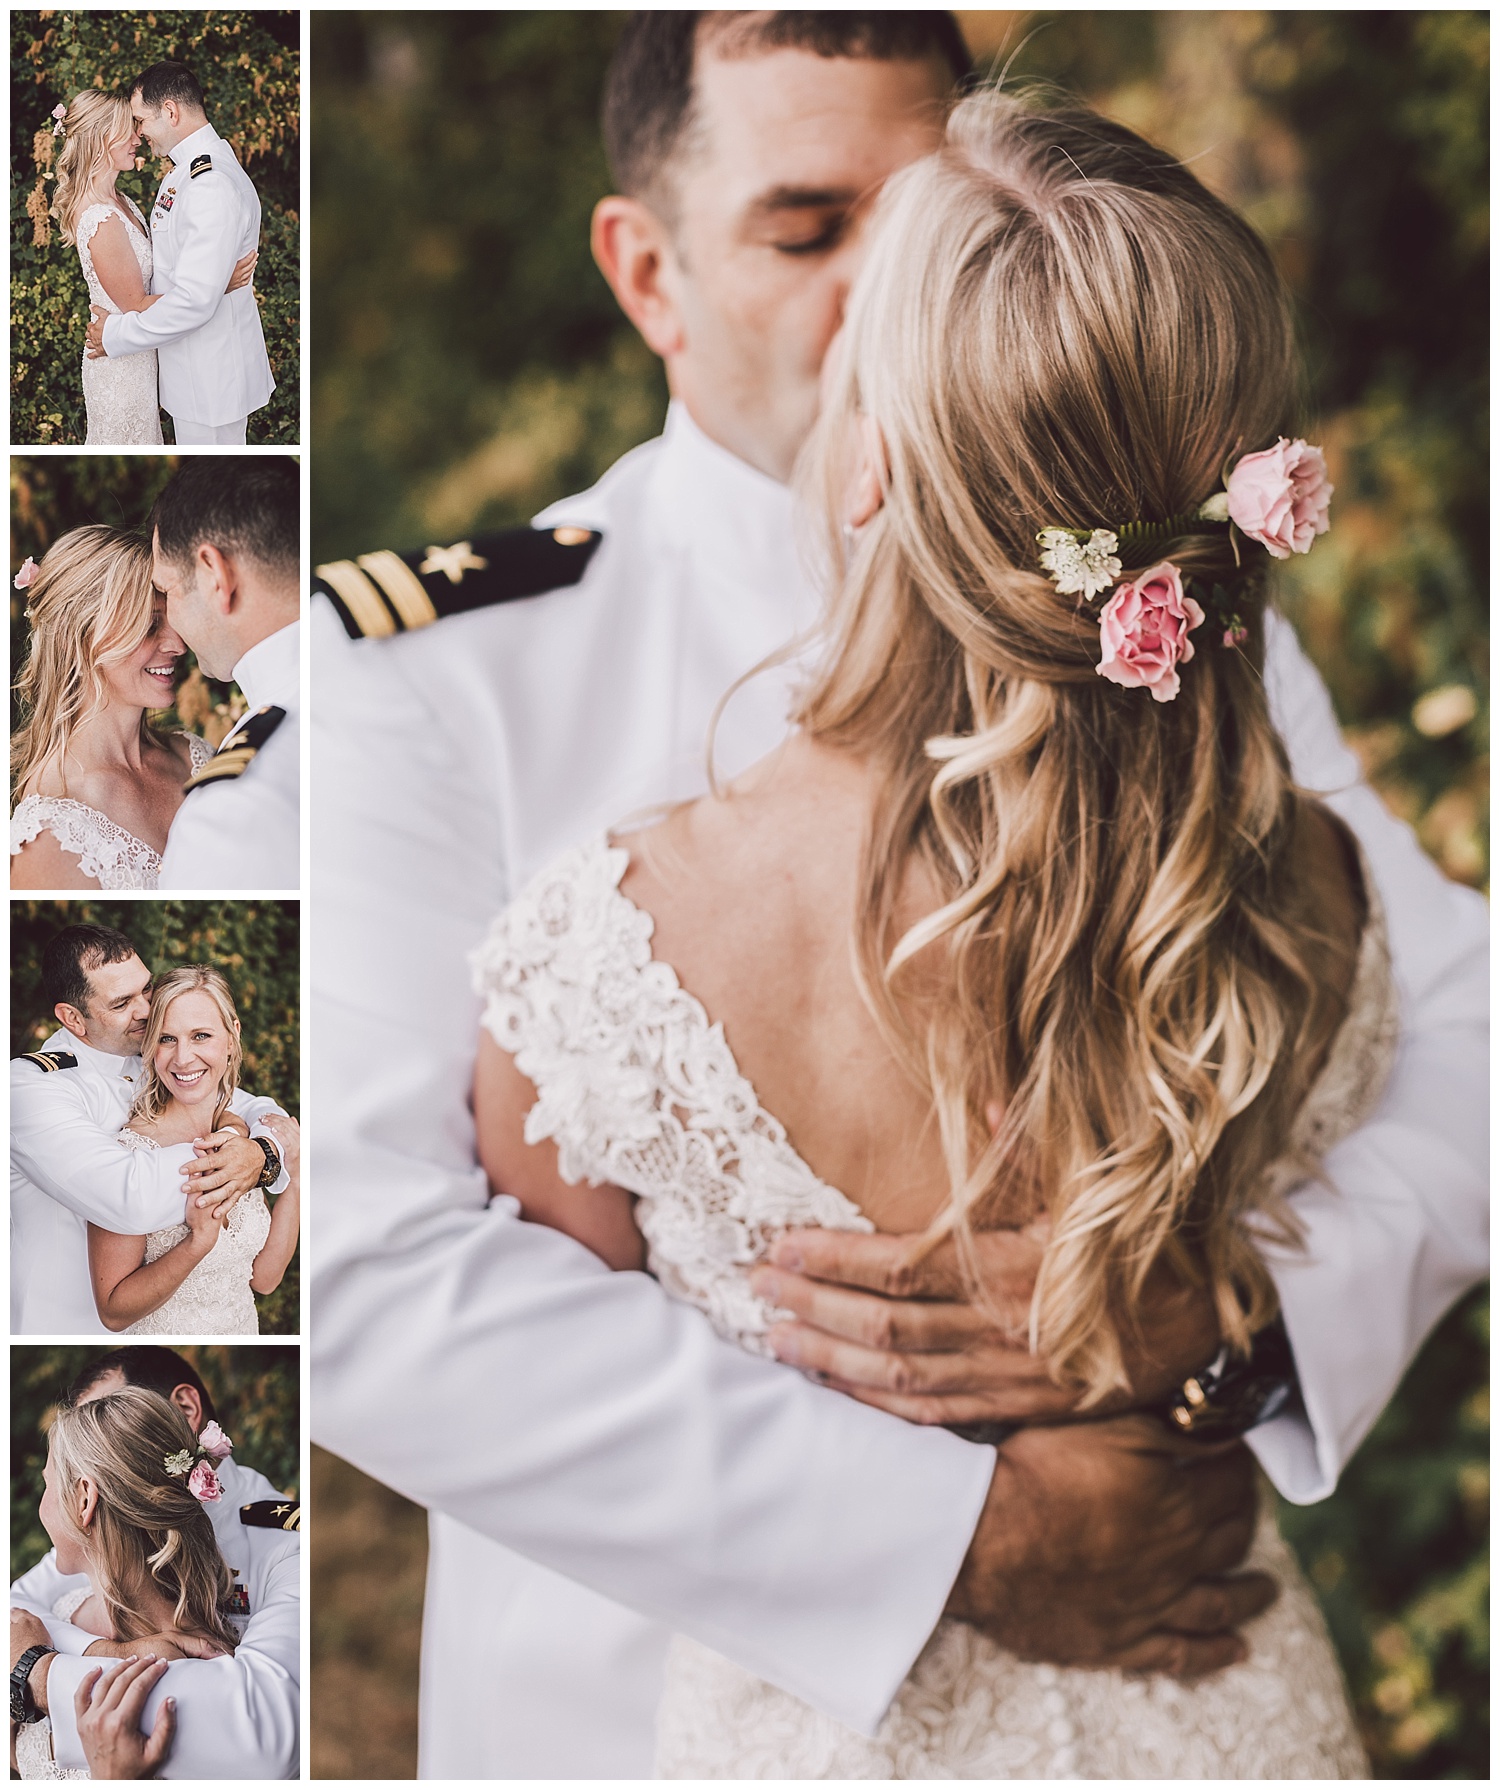 First look wedding photos in Port Orchard